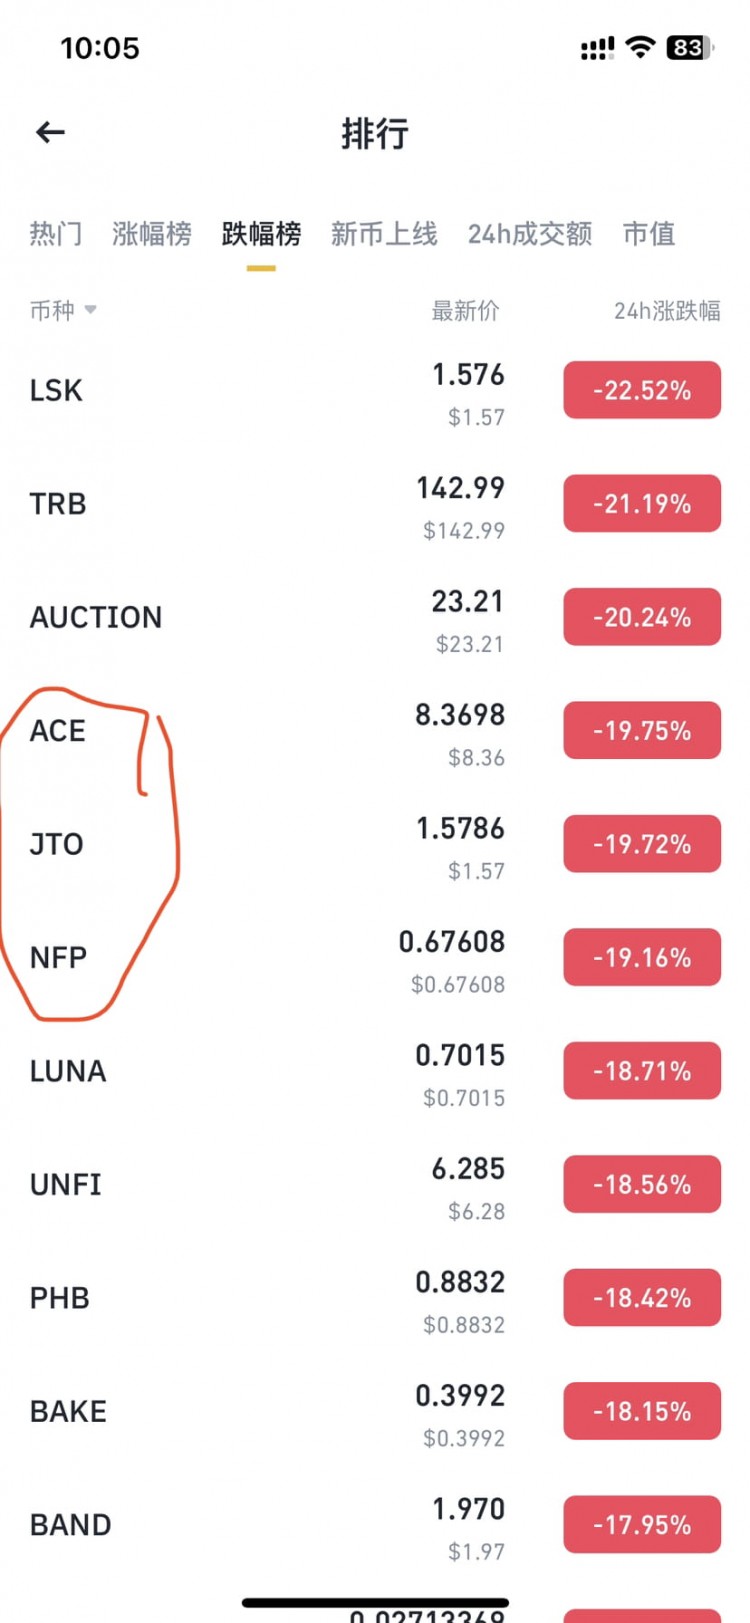 New Wave of Coin Performance Surges, Ace, JTO, NFP Outrageous!